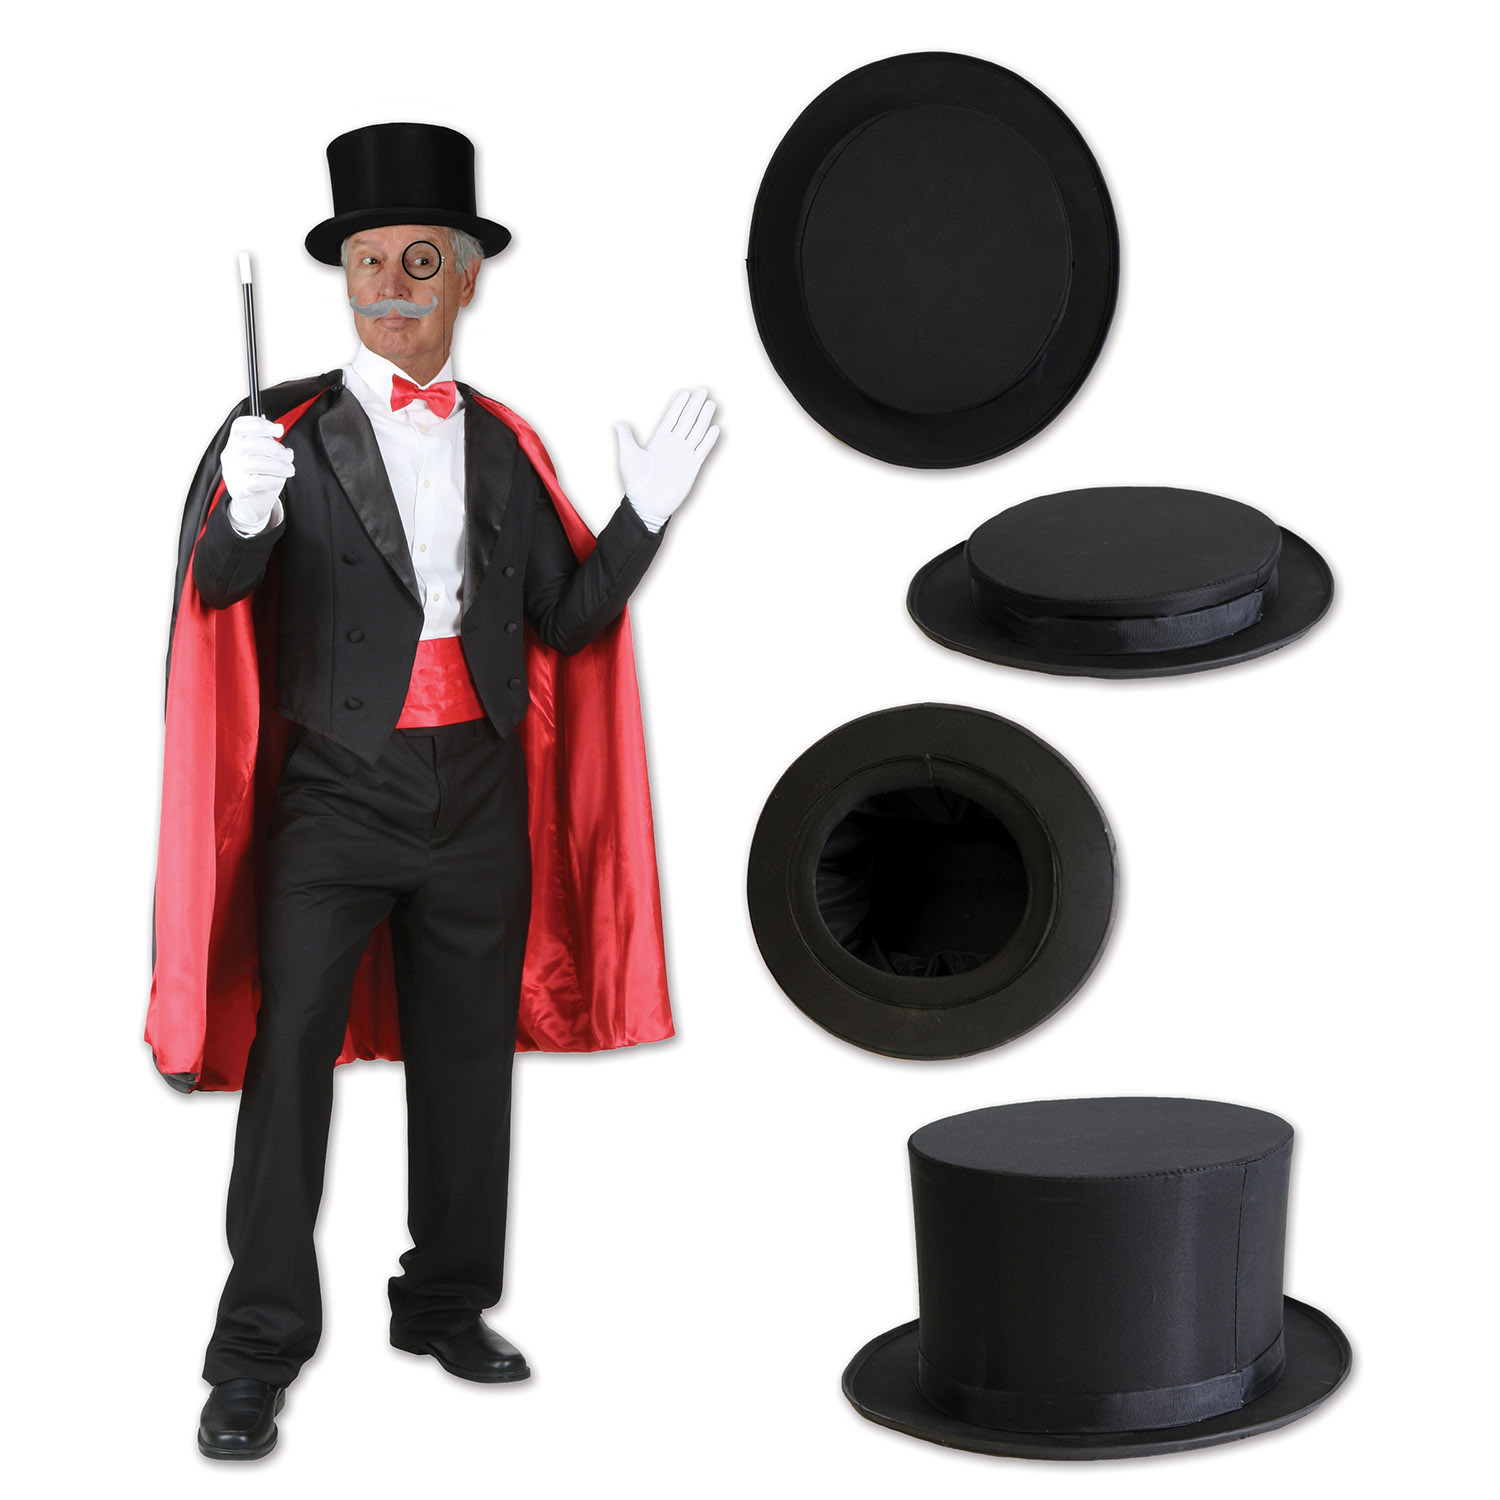 Calapsable top hat made of black fabric material.